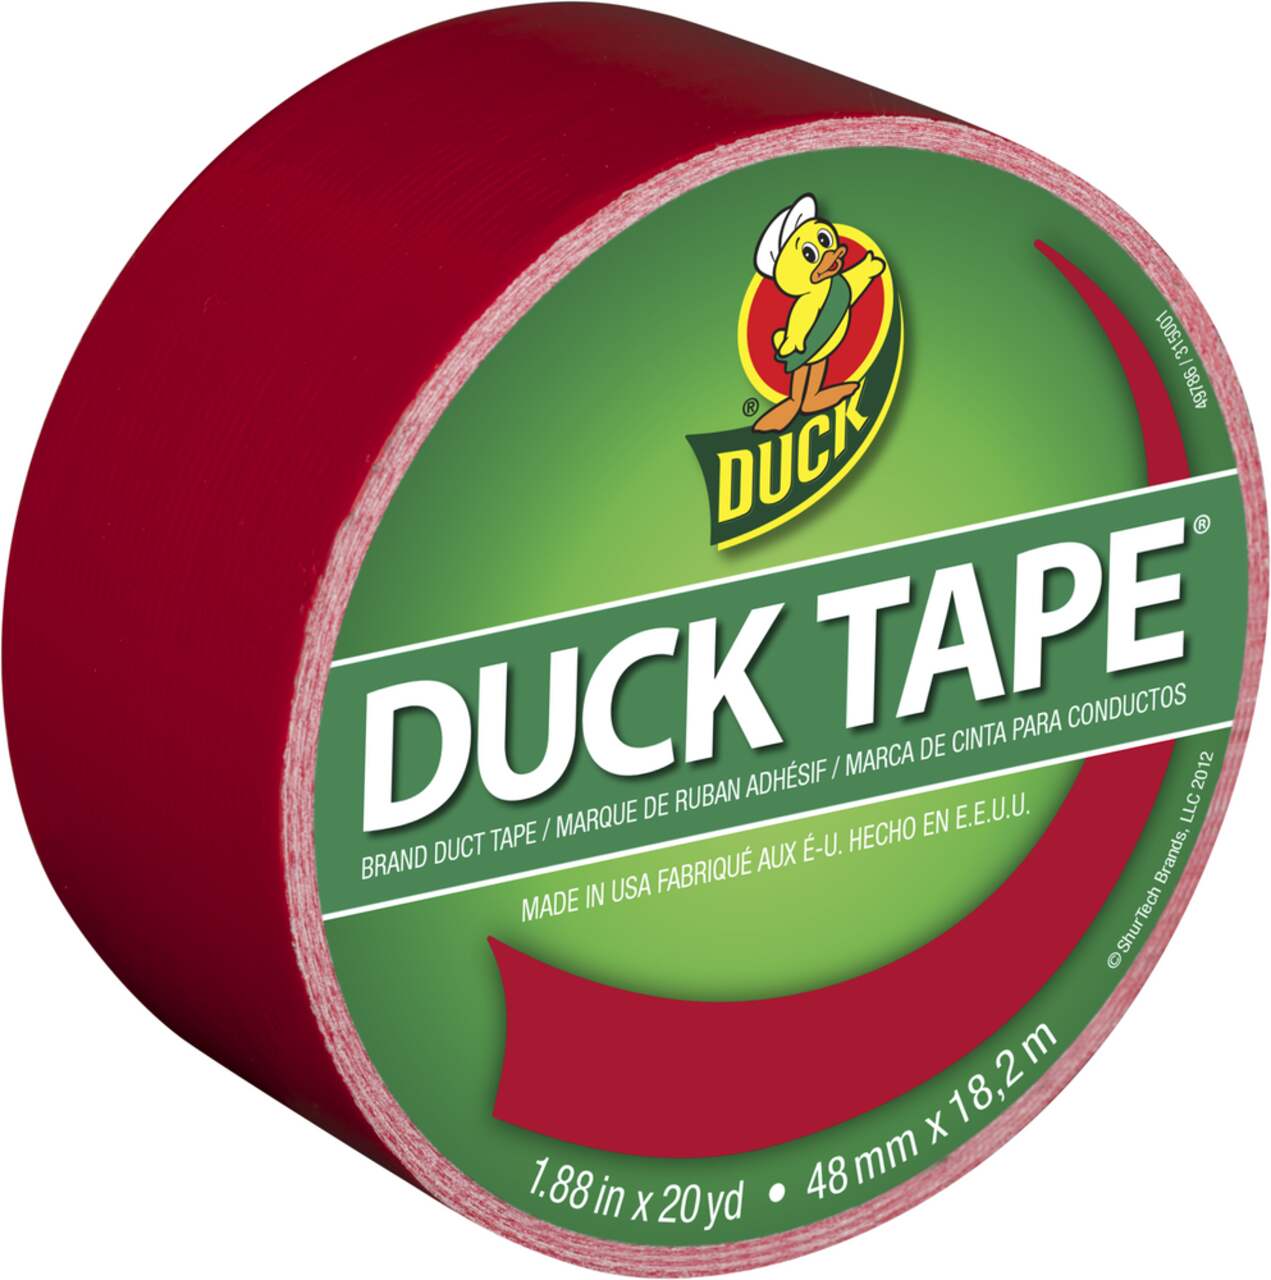 https://media-www.canadiantire.ca/product/fixing/paint/surface-prep-maintenance/0676059/duck-red-duct-tape-20yd-2169a4cb-c1ca-43b2-956d-a6cc5899ecdd.png?imdensity=1&imwidth=640&impolicy=mZoom